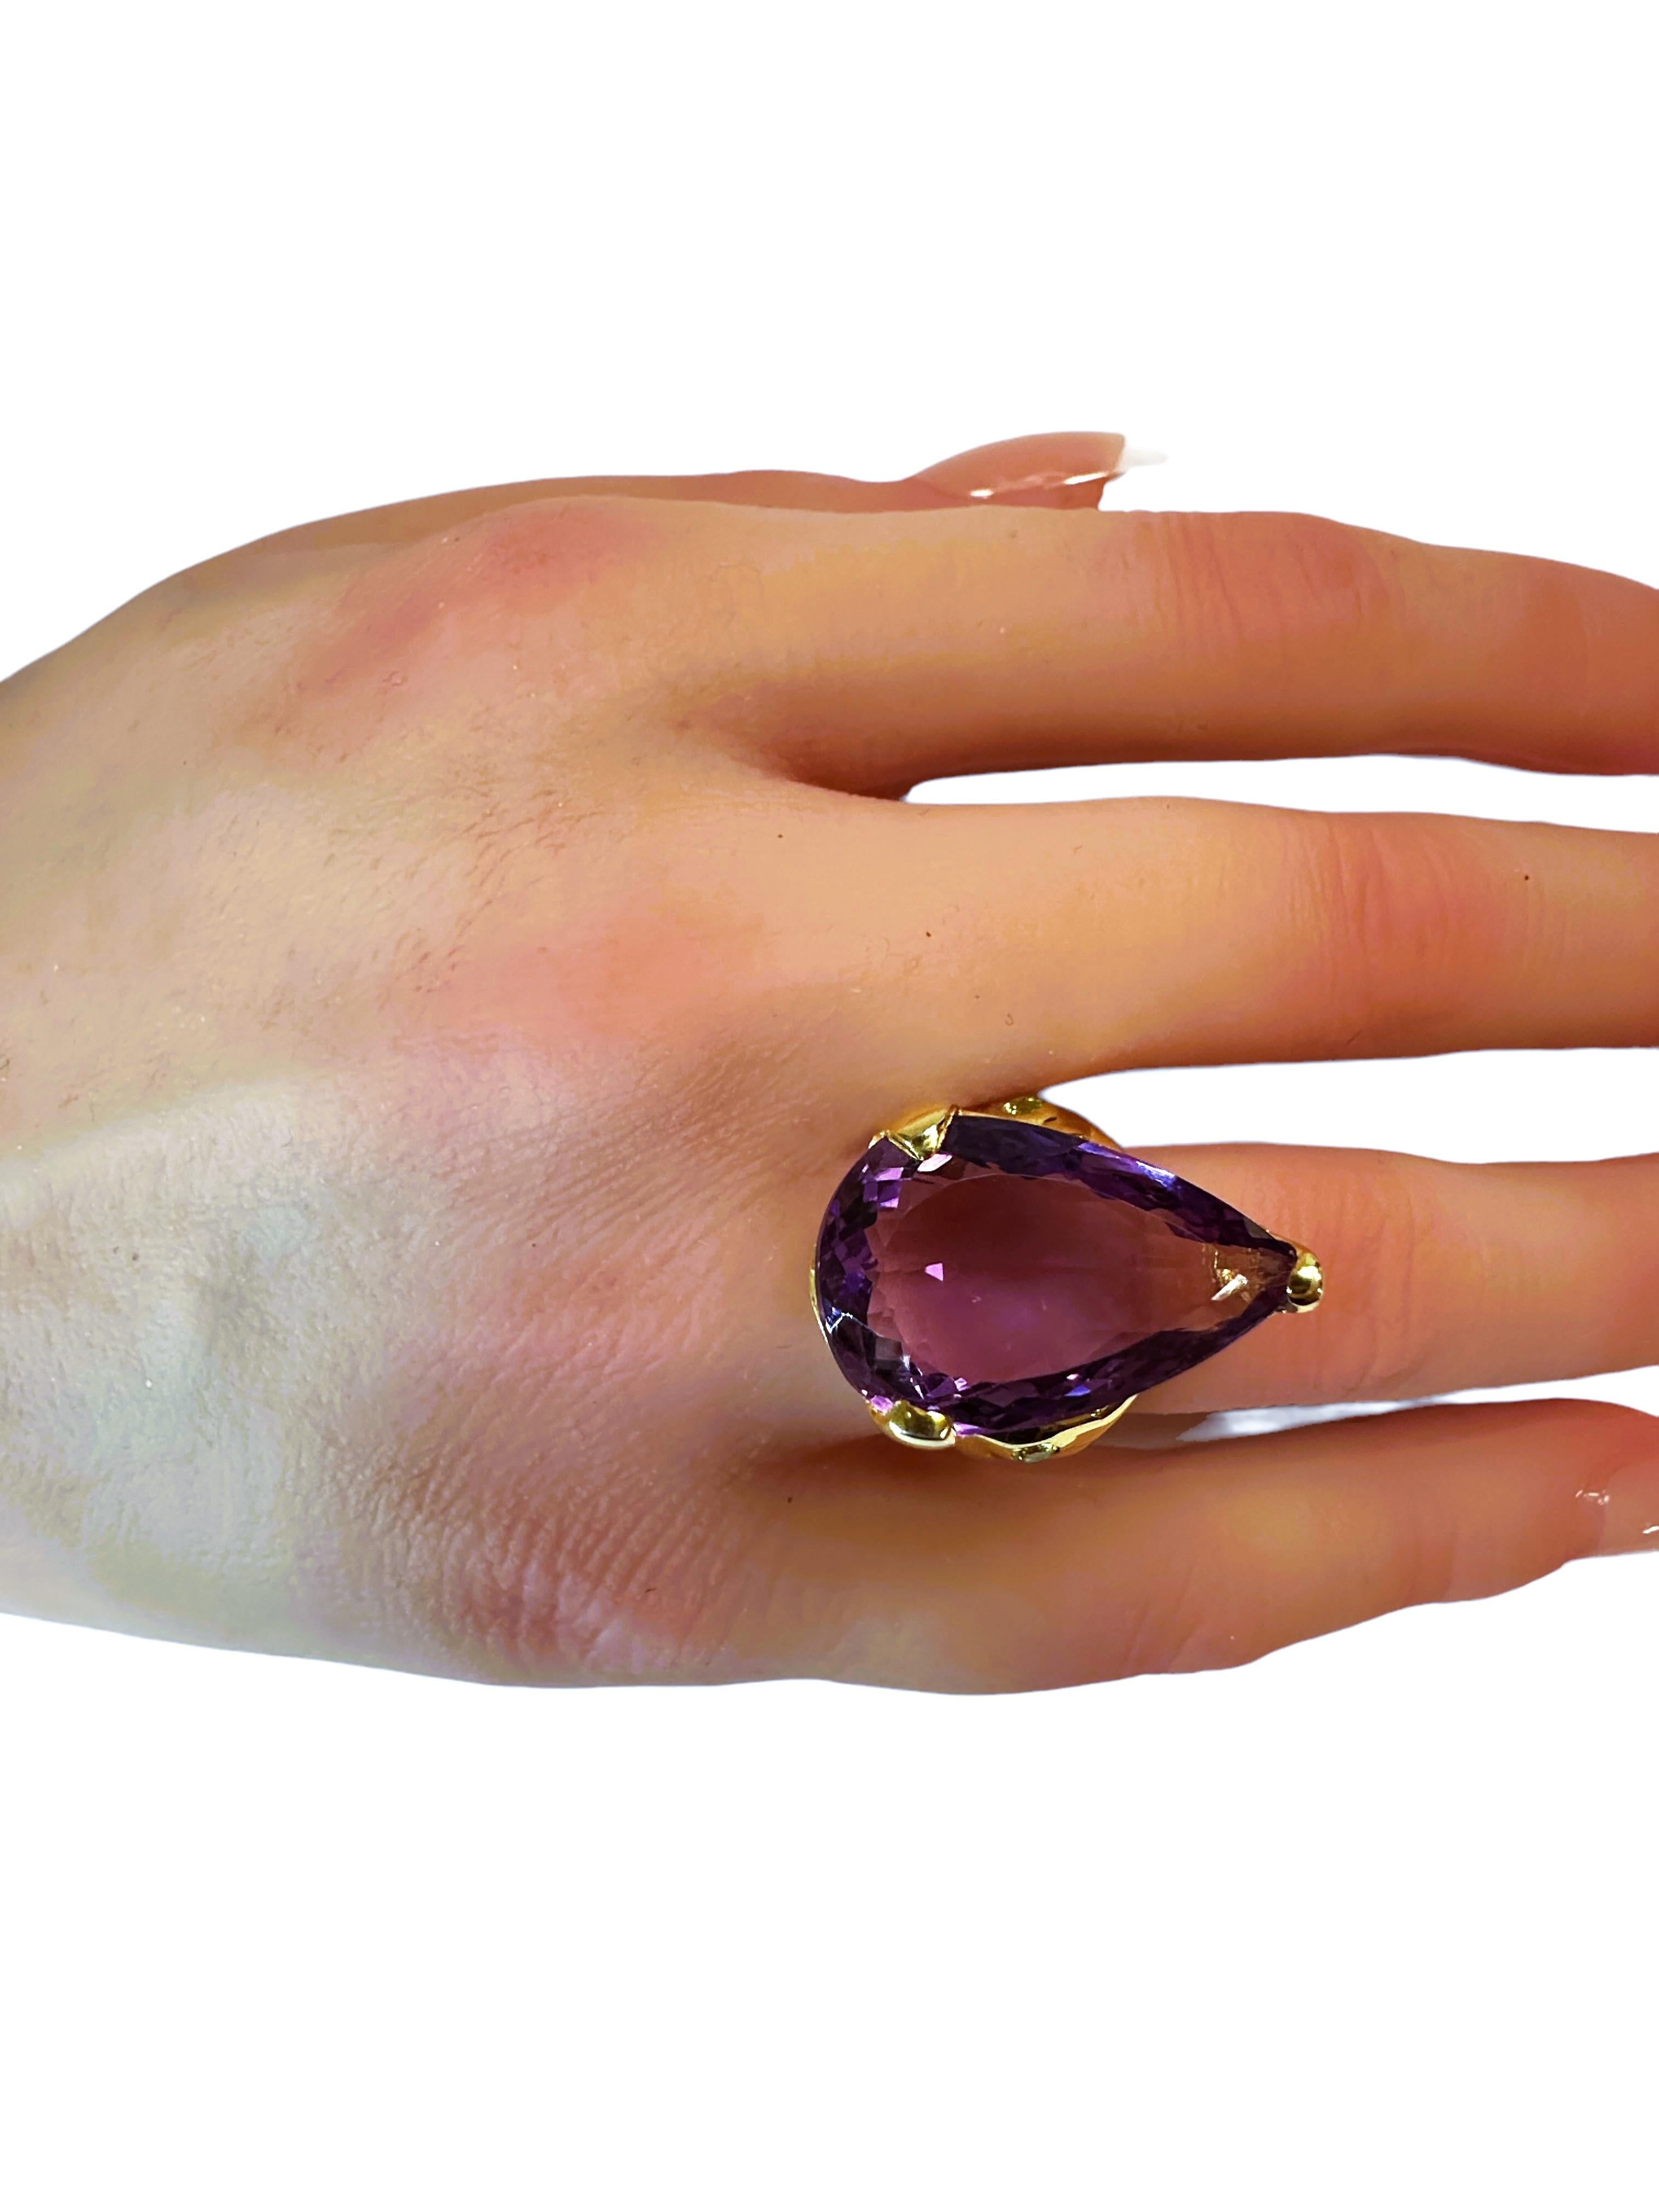 New African 16 Ct Purple Amethyst Yellow Gold Plated Sterling Ring Size 7.5 For Sale 1